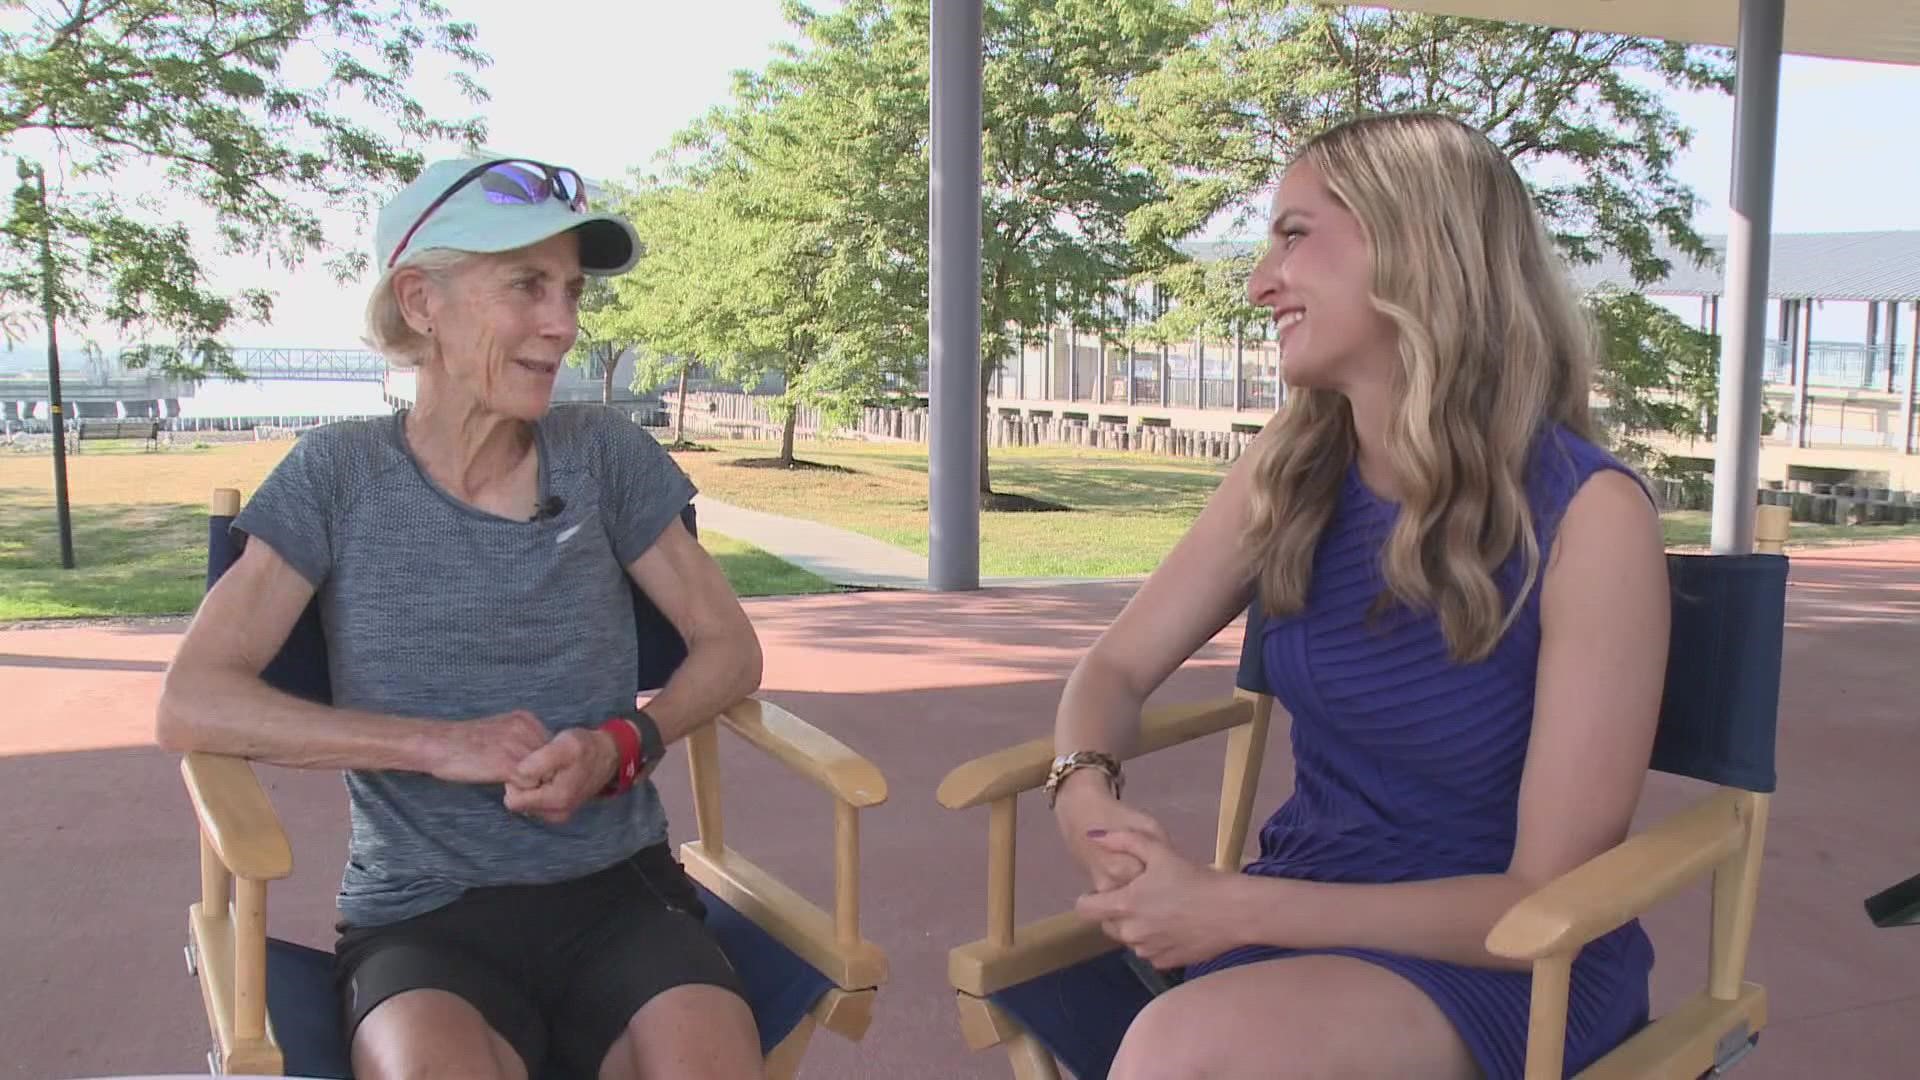 Beach to Beacon founder and Olympic gold medalist Joan Benoit Samuelson led a special training run Thursday morning with The Cromwell Center's race team.